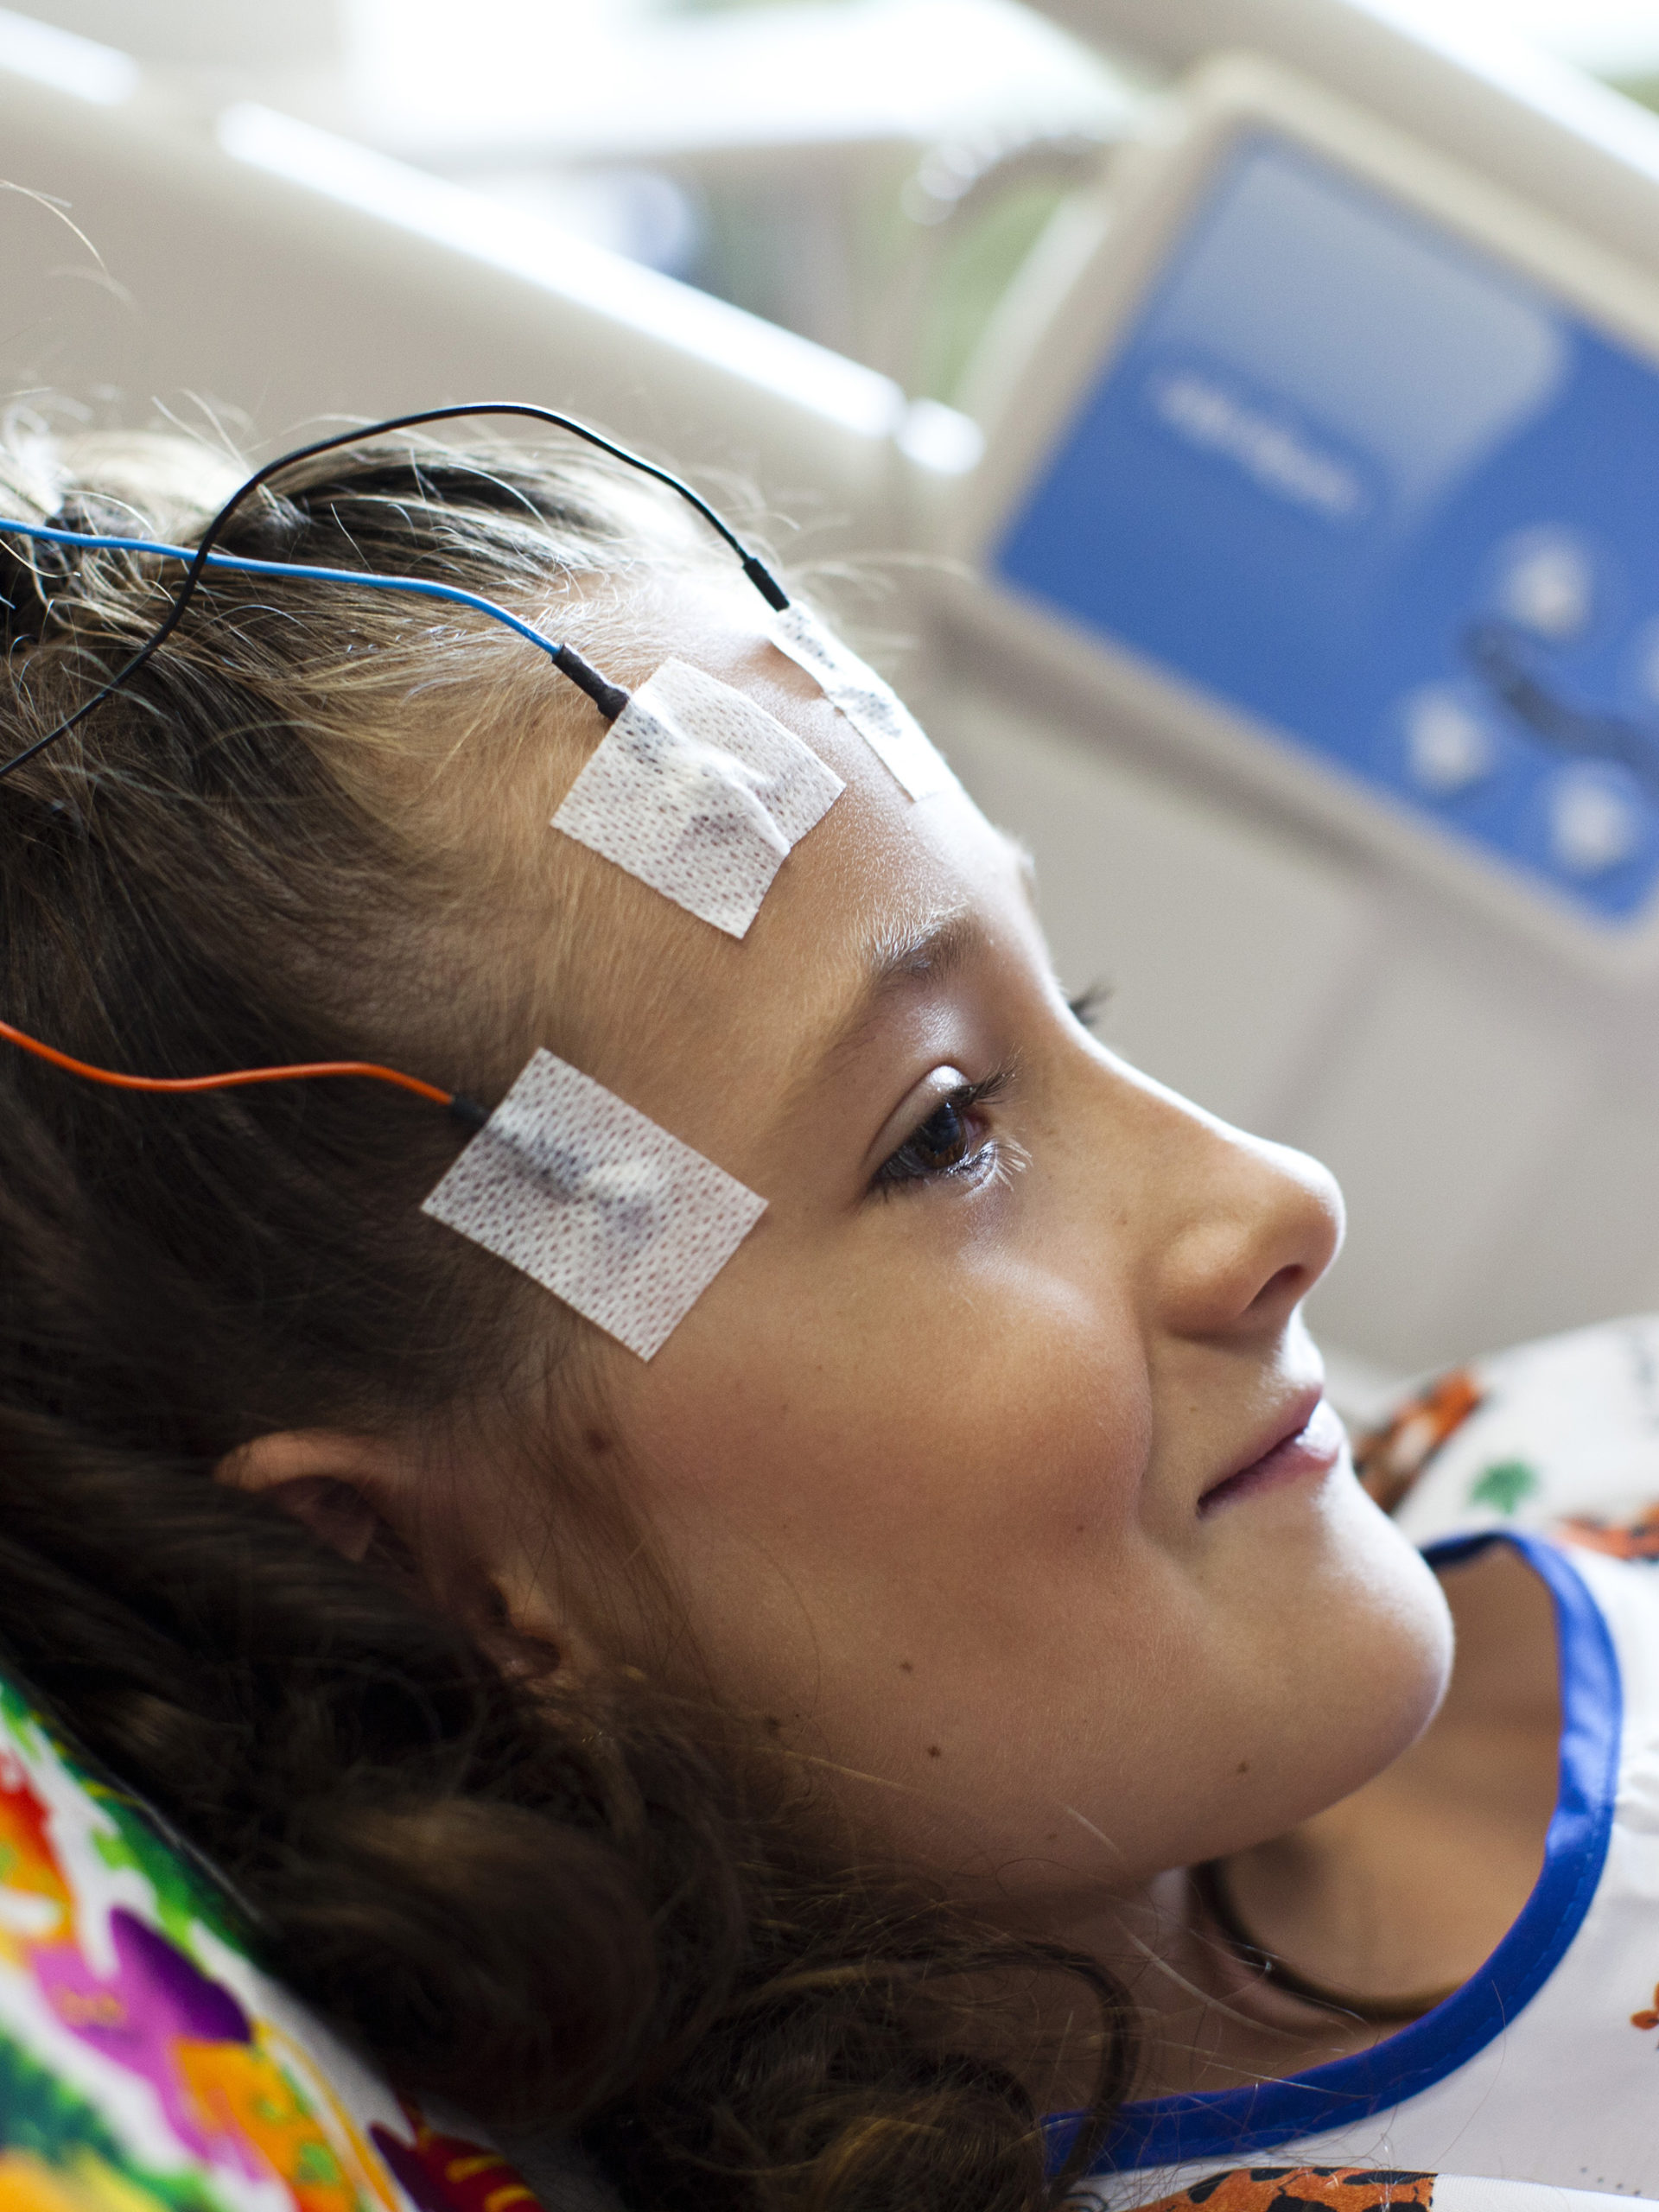 EEG monitoring a young girl at CHOC children's hospital